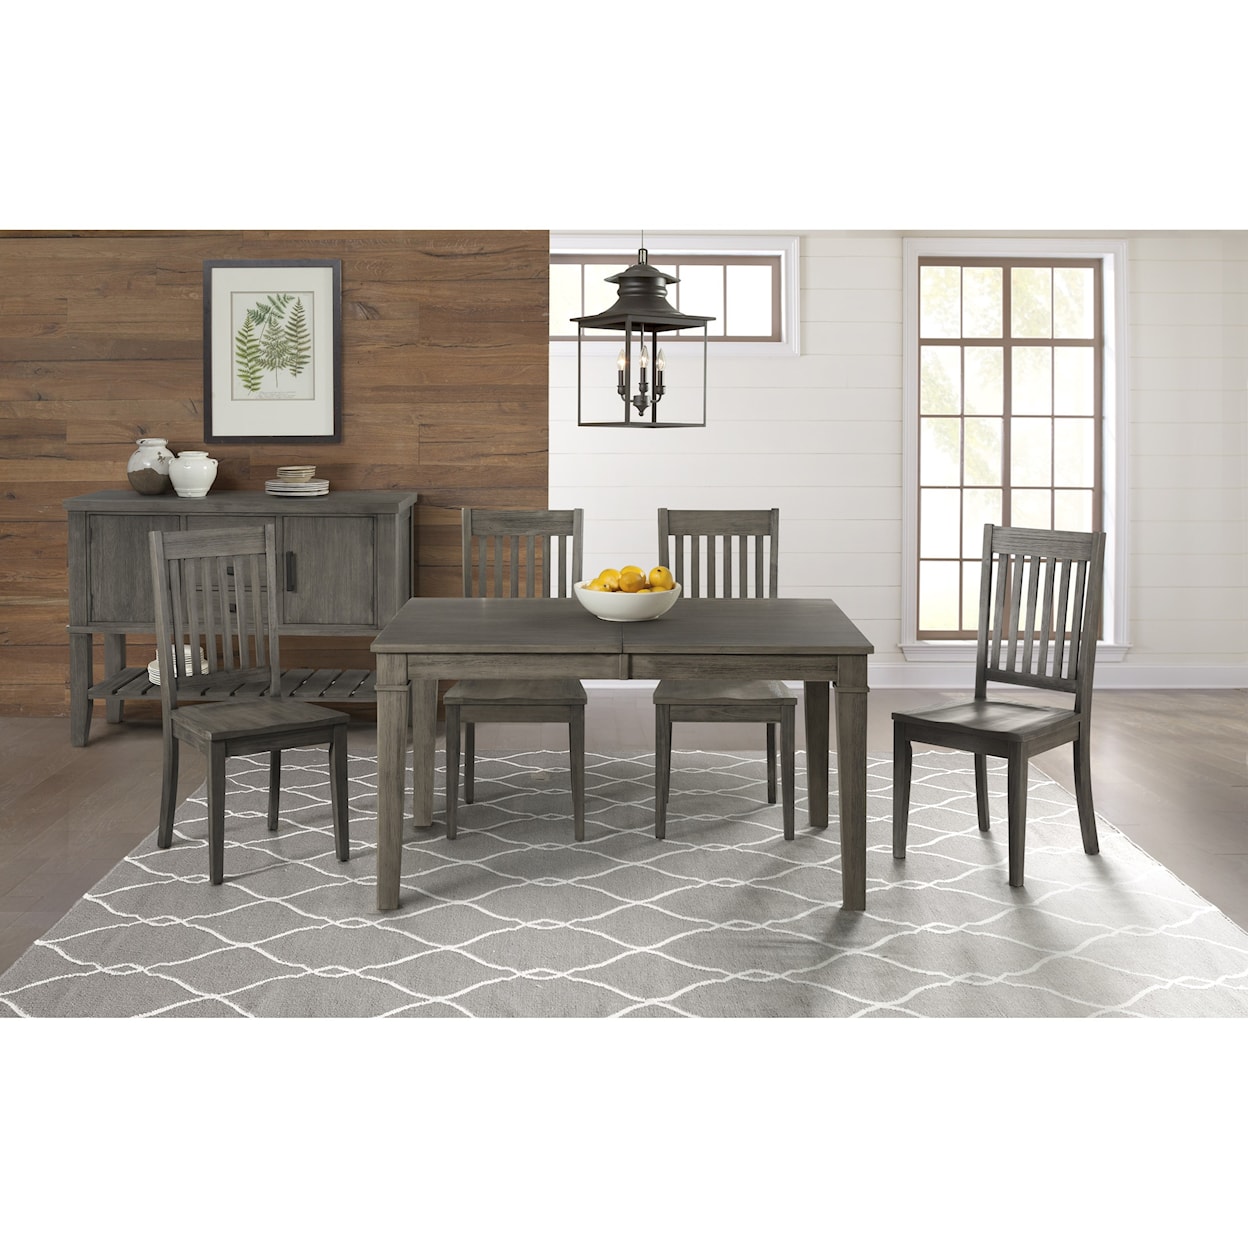 AAmerica Huron Casual Dining Room Group